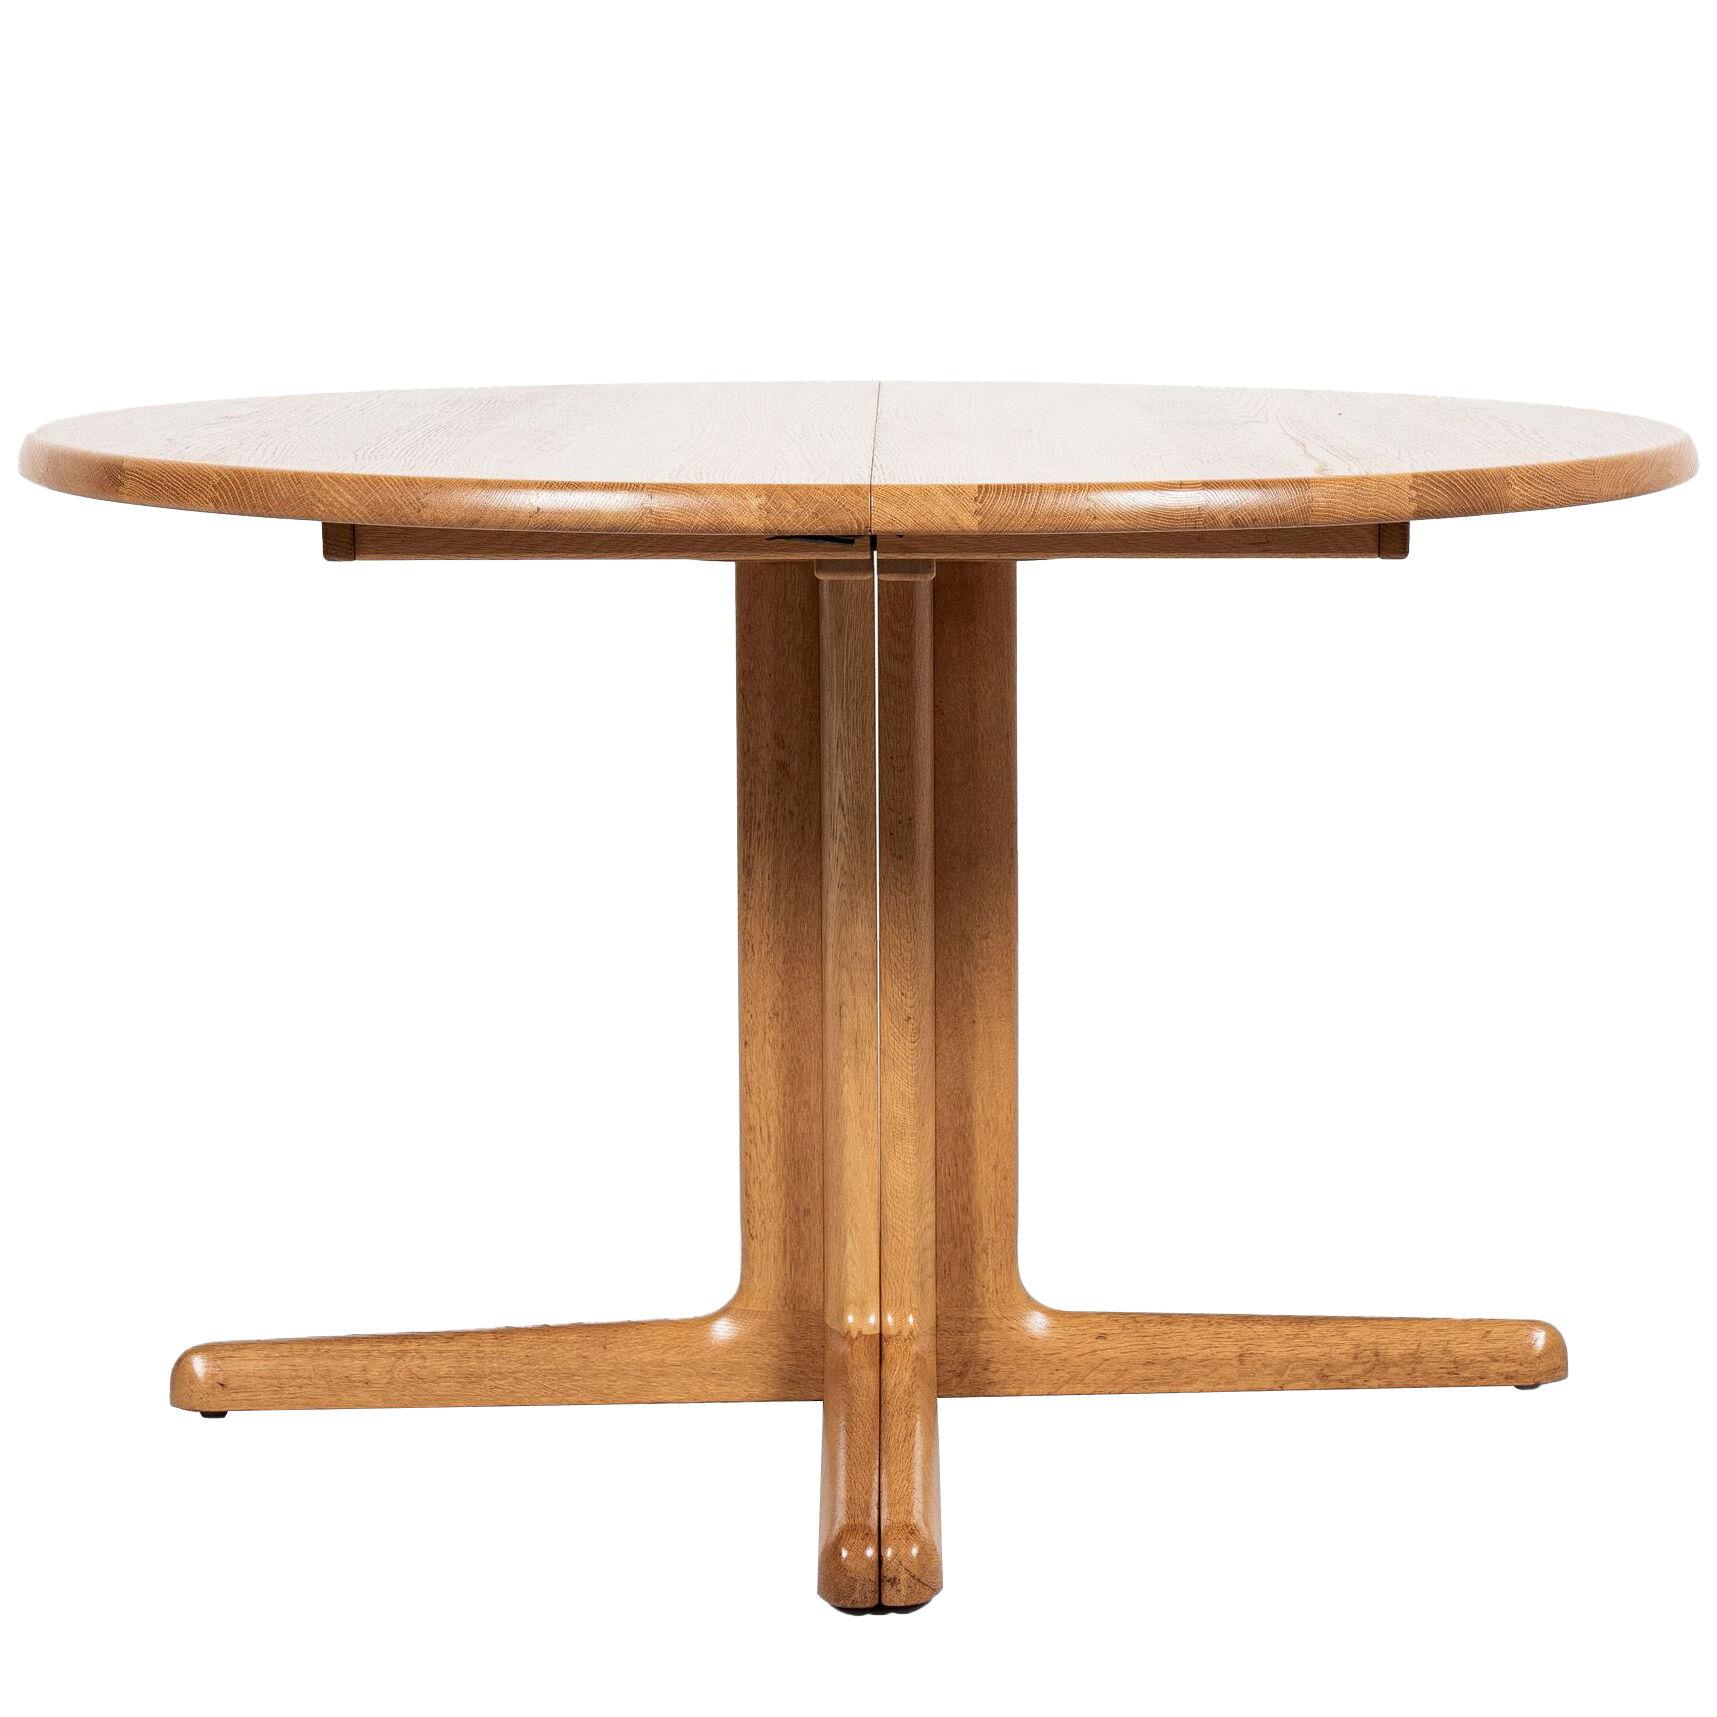 Midcentury Danish round dining table in solid oak with 2 extensions 1960s